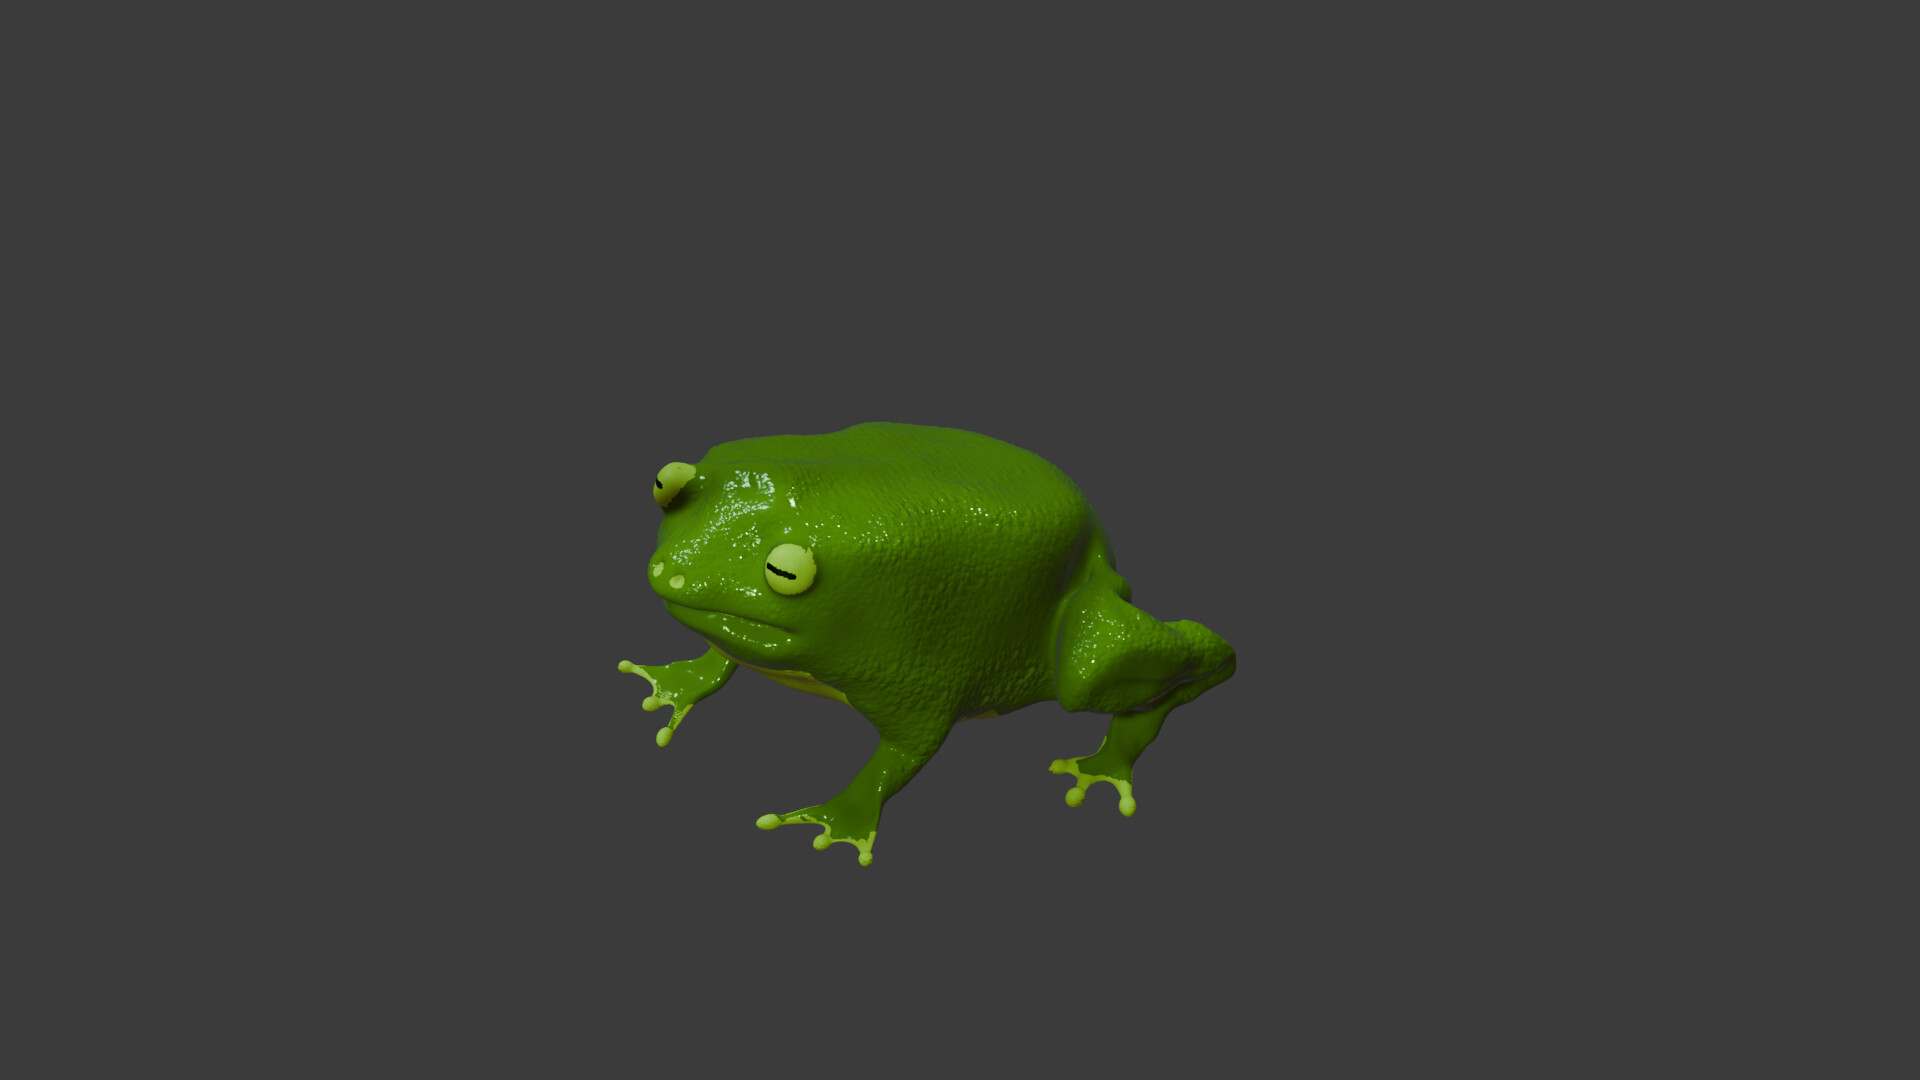 I made a frog as my first ever sculpt! - Show - GameDev.tv